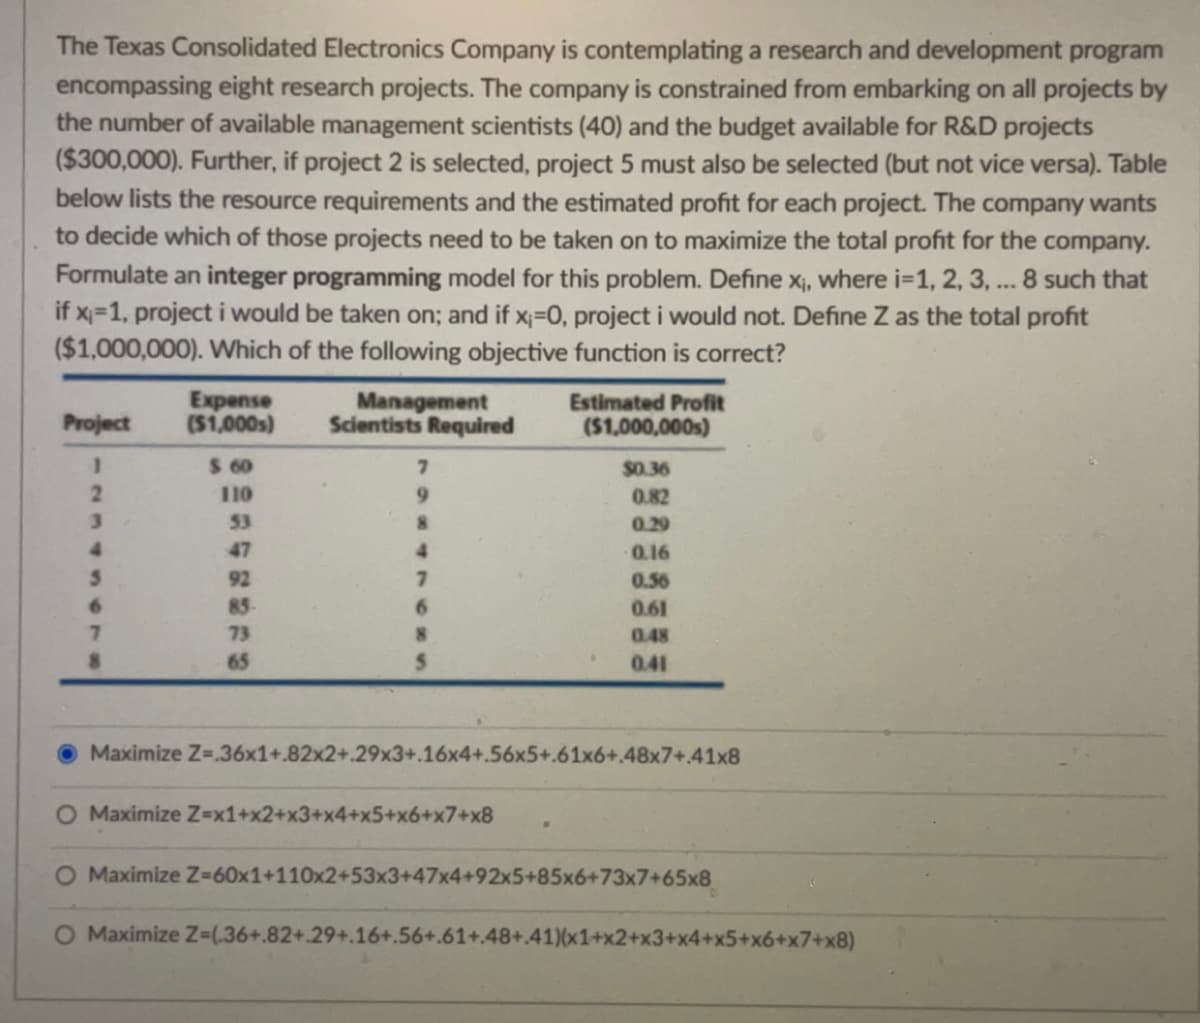 The Texas Consolidated Electronics Company is contemplating a research and development program
encompassing eight research projects. The company is constrained from embarking on all projects by
the number of available management scientists (40) and the budget available for R&D projects
($300,000). Further, if project 2 is selected, project 5 must also be selected (but not vice versa). Table
below lists the resource requirements and the estimated profit for each project. The company wants
to decide which of those projects need to be taken on to maximize the total profit for the company.
Formulate an integer programming model for this problem. Define x₁, where i=1, 2, 3, ... 8 such that
if x=1, project i would be taken on; and if x=0, project i would not. Define Z as the total profit
($1,000,000). Which of the following objective function is correct?
Expense
($1,000s)
Management
Scientists Required
Project
Estimated Profit
($1,000,000s)
I
$ 60
7
$0.36
2
110
9
0.82
53
8
0.29
4
47
4
0.16
5
92
7
0.56
6
85-
6
0.61
7
73
8
0.48
8
65
5
0.41
Maximize Z=.36x1+.82x2+.29x3+.16x4+.56x5+.61x6+.48x7+.41x8
O Maximize Z-x1+x2+x3+x4+x5+x6+x7+x8
O Maximize Z=60x1+110x2+53x3+47x4+92x5+85x6+73x7+65x8
O Maximize Z=(.36+.82+.29+.16+.56+.61+.48+.41)(x1+x2+x3+x4+x5+x6+x7+x8)